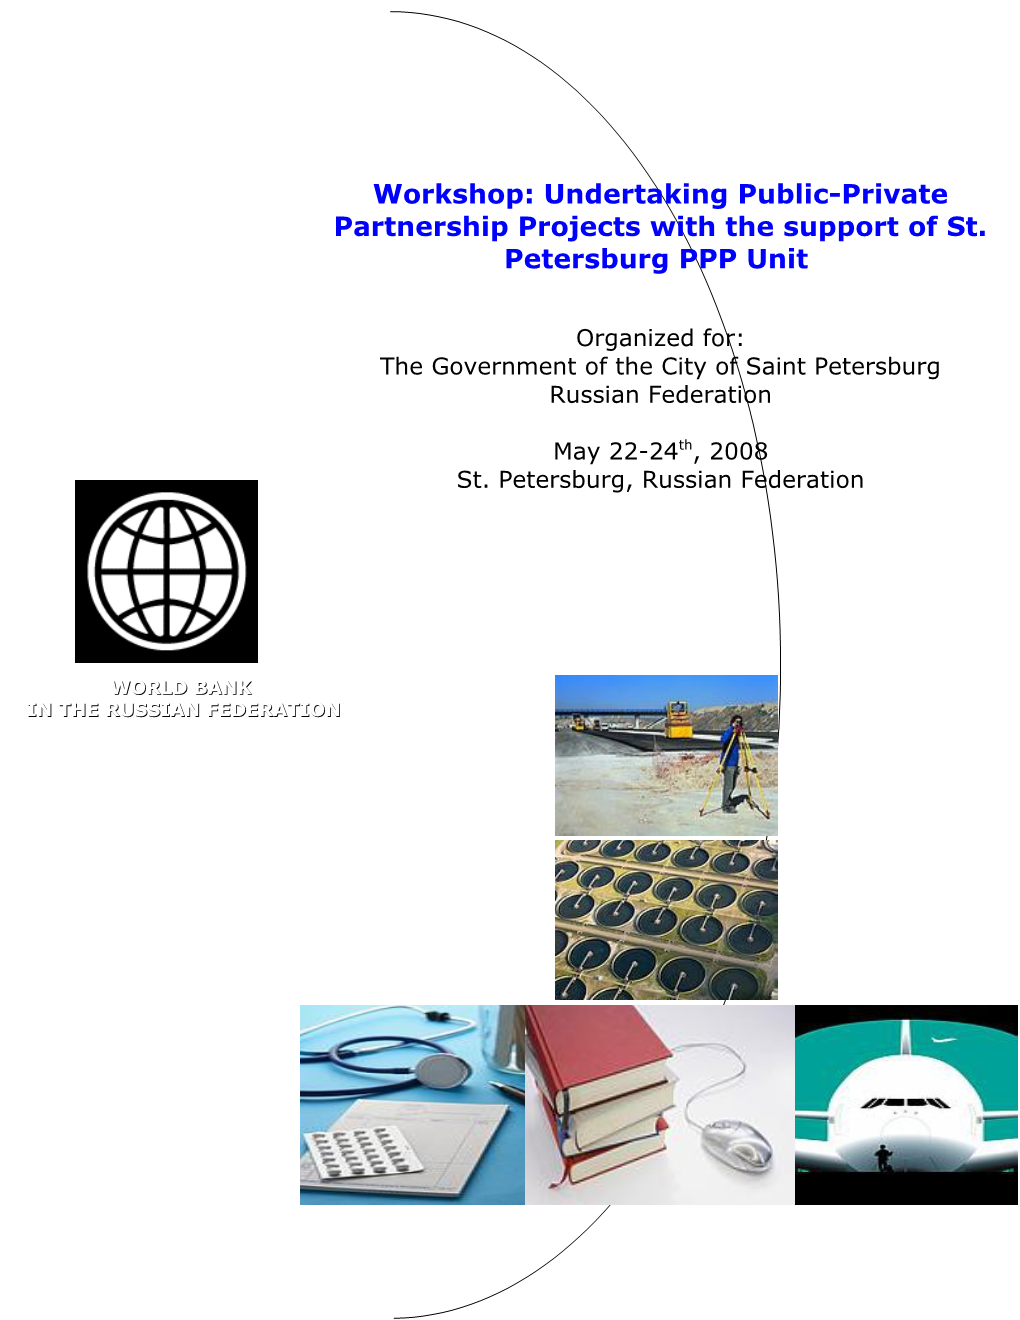 Workshop: Undertaking Ppp Projects with the Support of St. Petersburg Ppp Unit